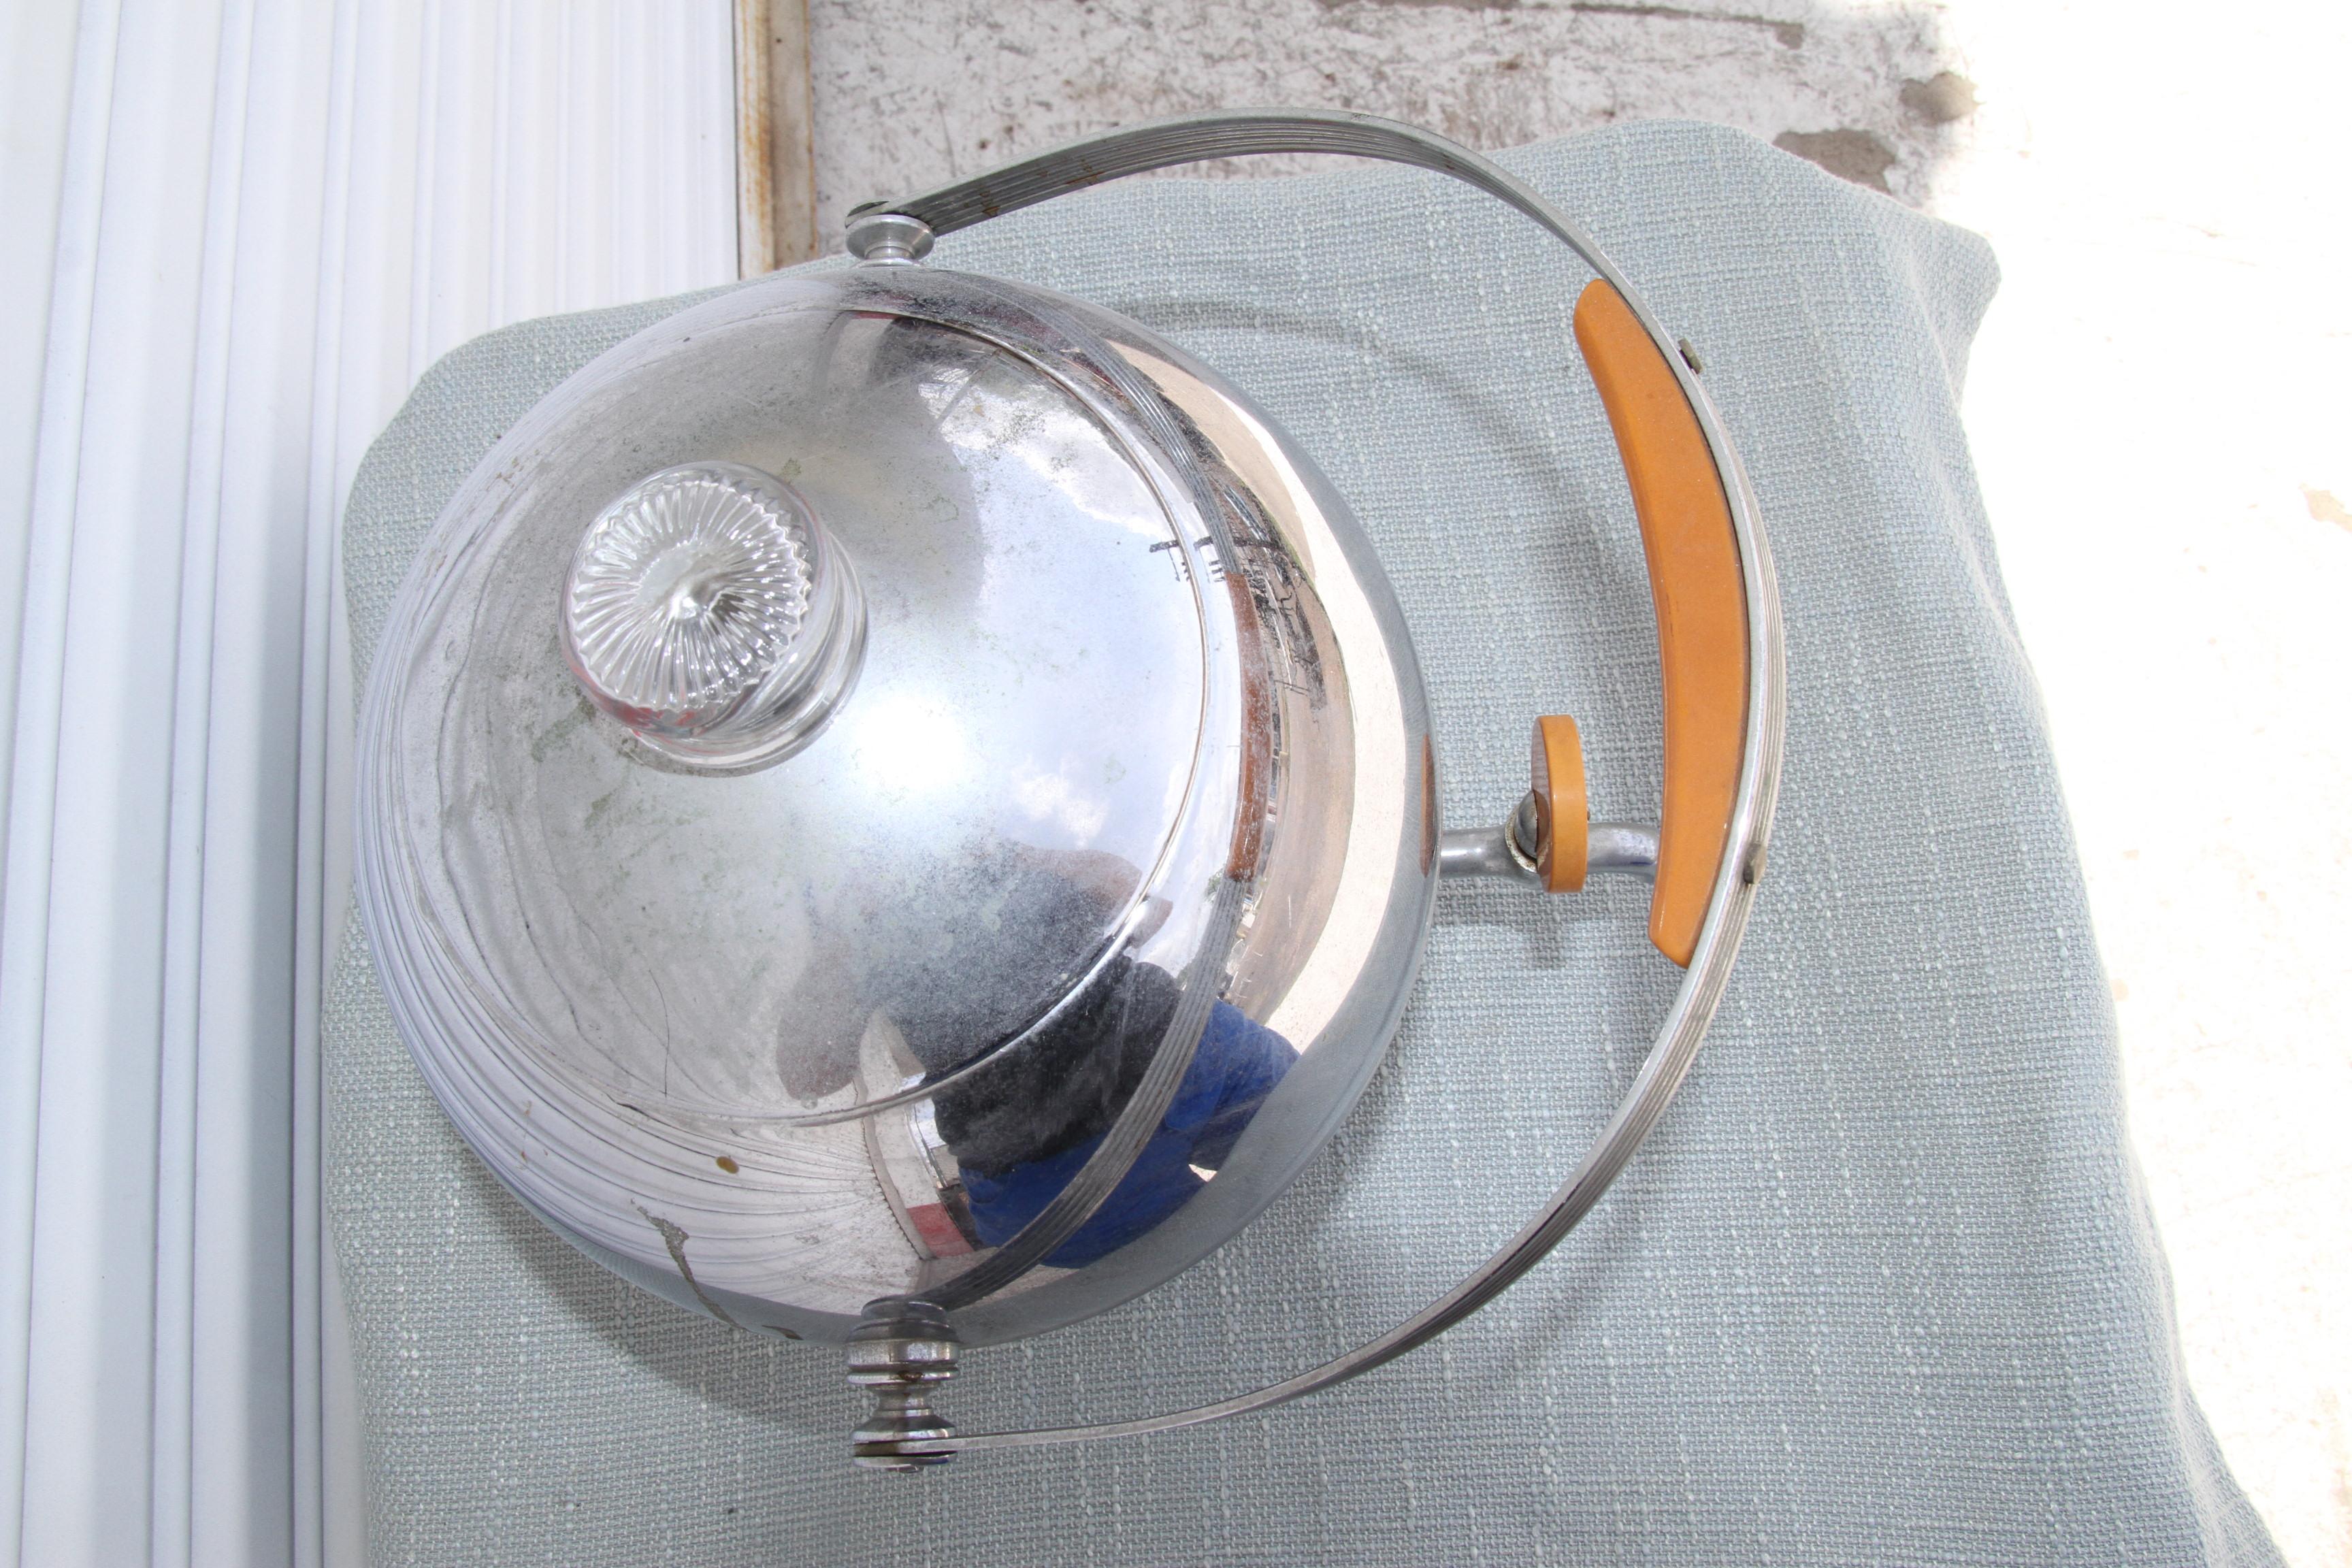 Art Deco chrome and Bakelite coffee urn made by Manning Bowman. The spherical percolator has bakelite handle, turn knob and base. 

Height: 14.5 in
Width: 10 in 
Depth: 11 in.